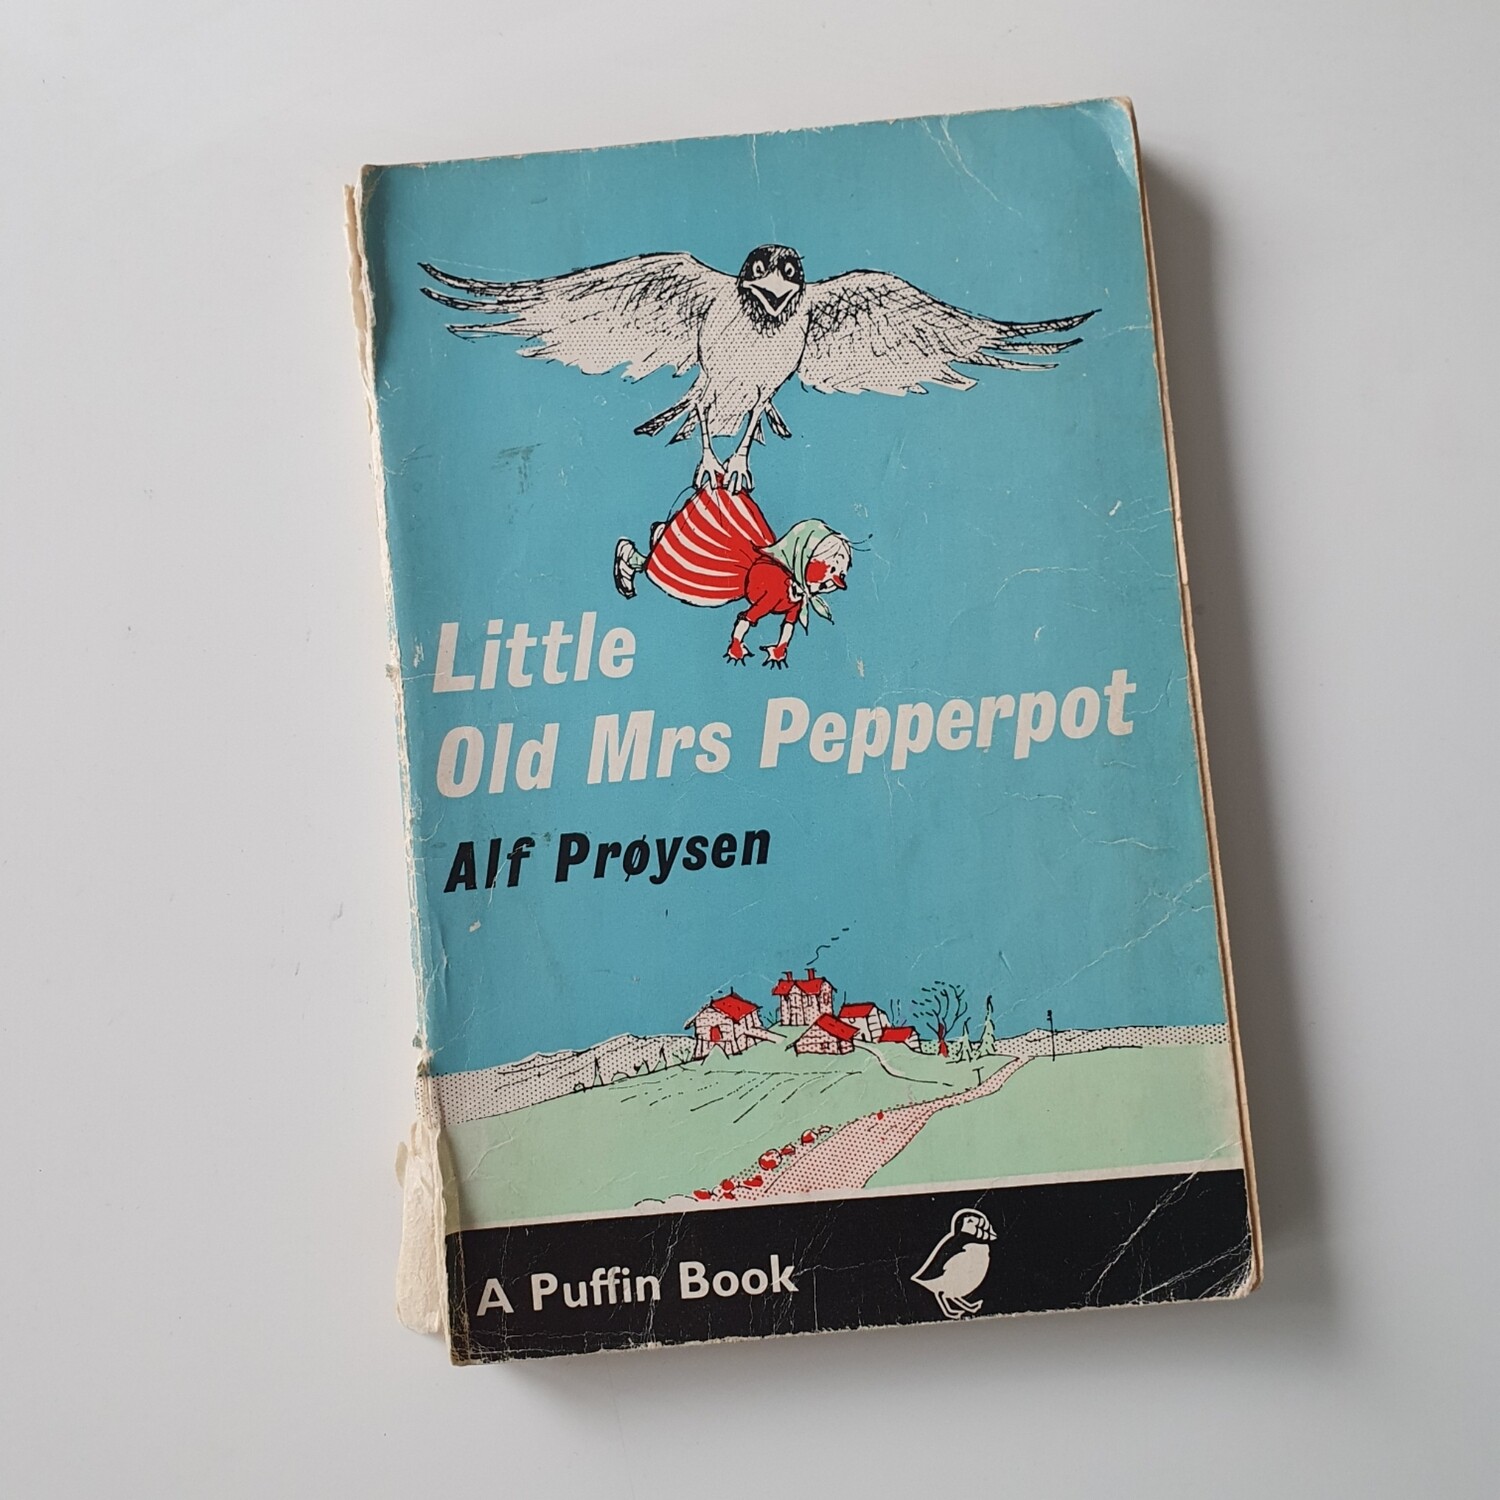 Little Old Mrs Pepperpot - made from a paperback book